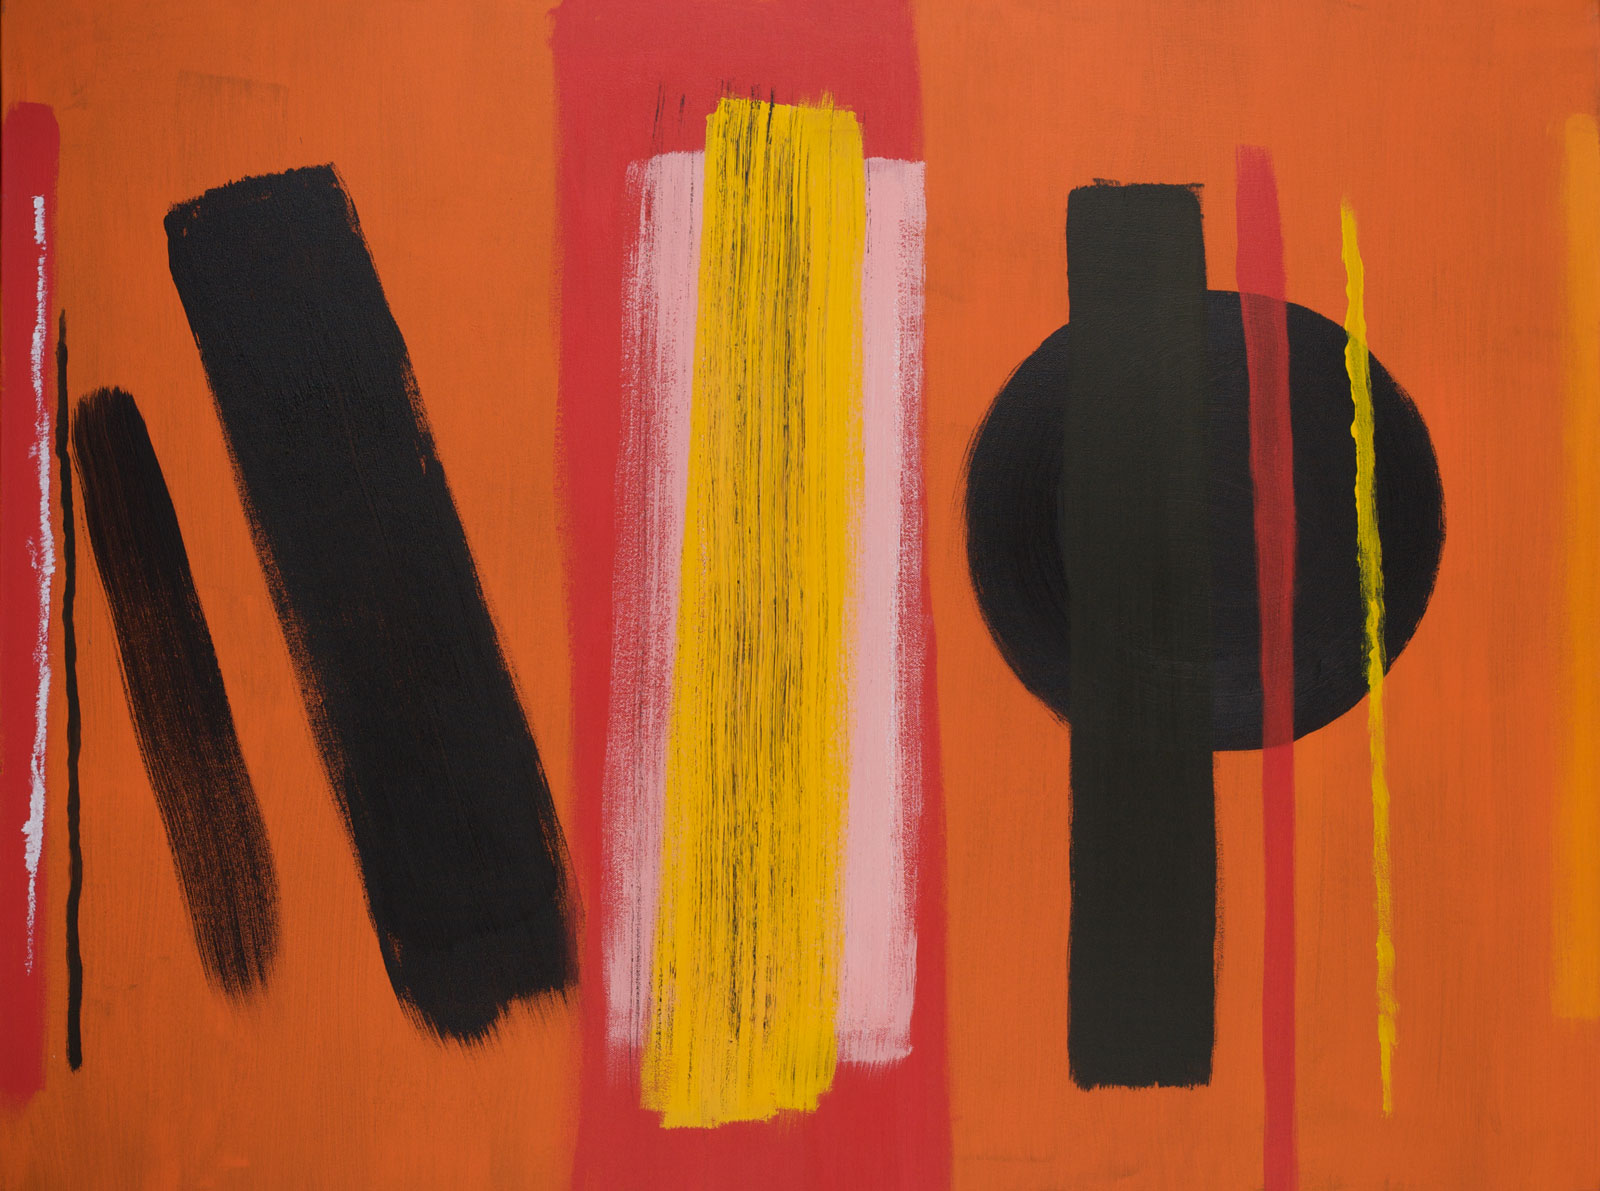 A painting of vertical brushstrokes in black and yellow with a black circle beneath one of the right. The background is orange with a red vertical band at the centre.